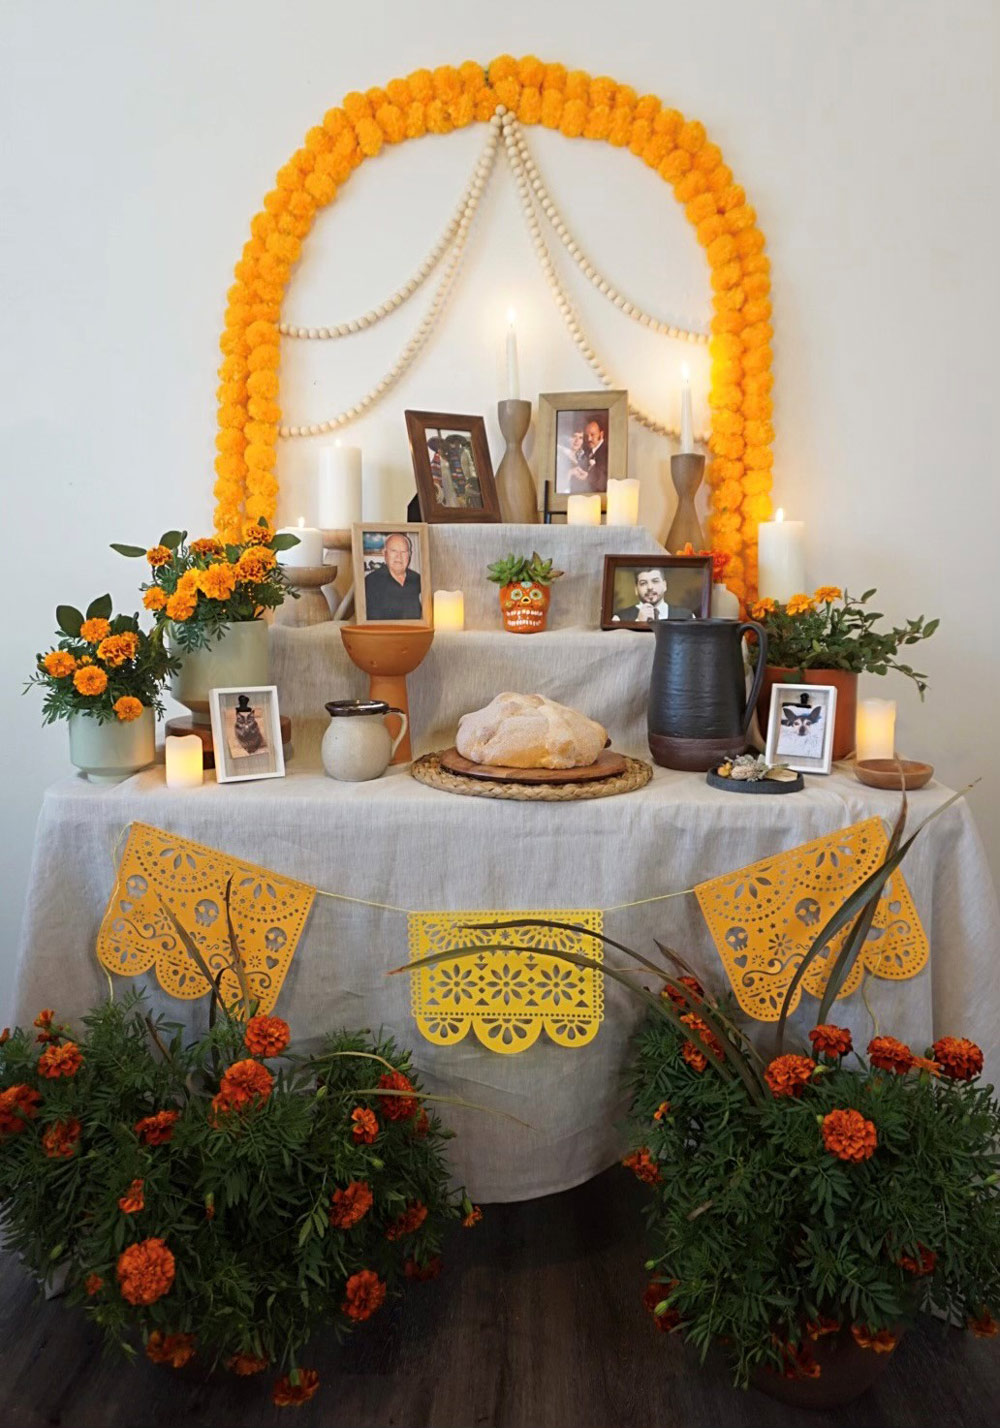 A completed Ofrenda garnished with decorations.